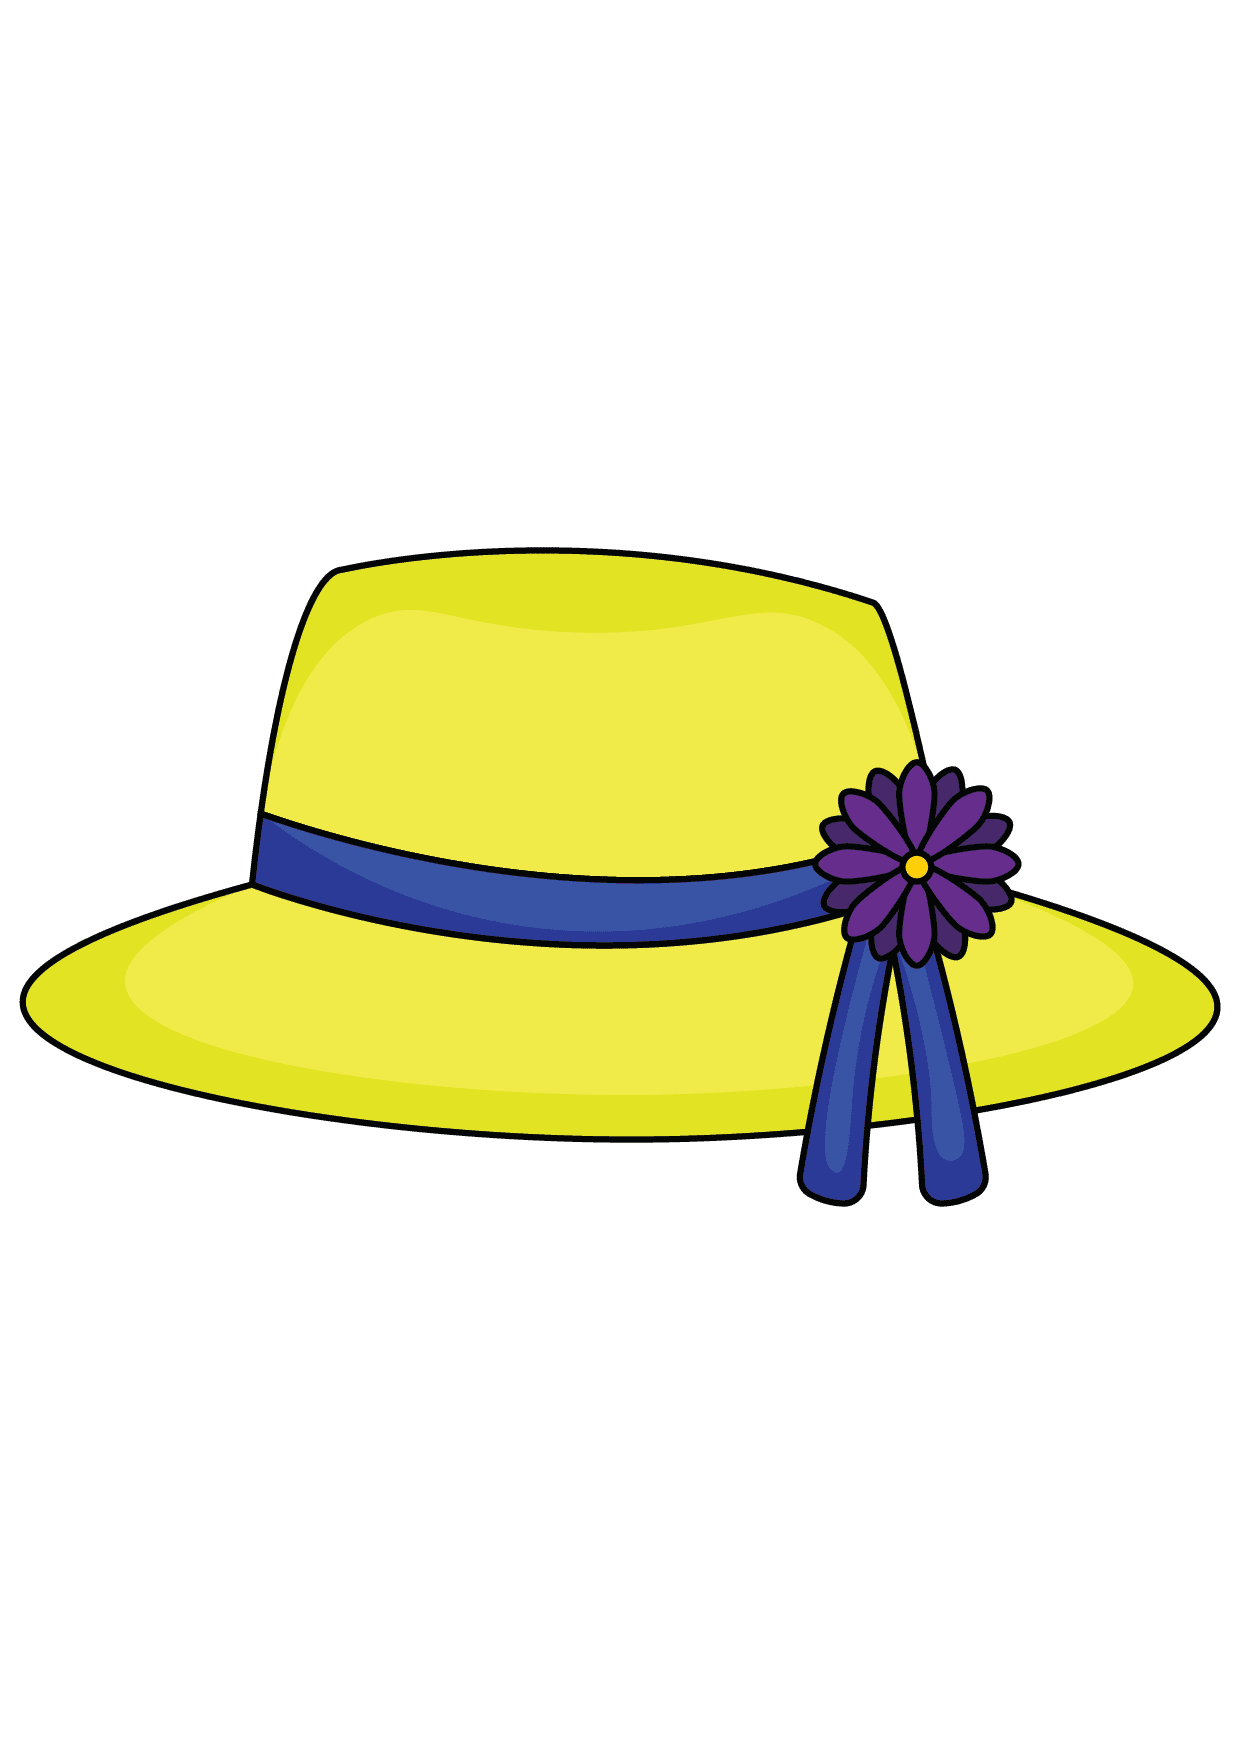 How to Draw A Hat Step by Step Printable